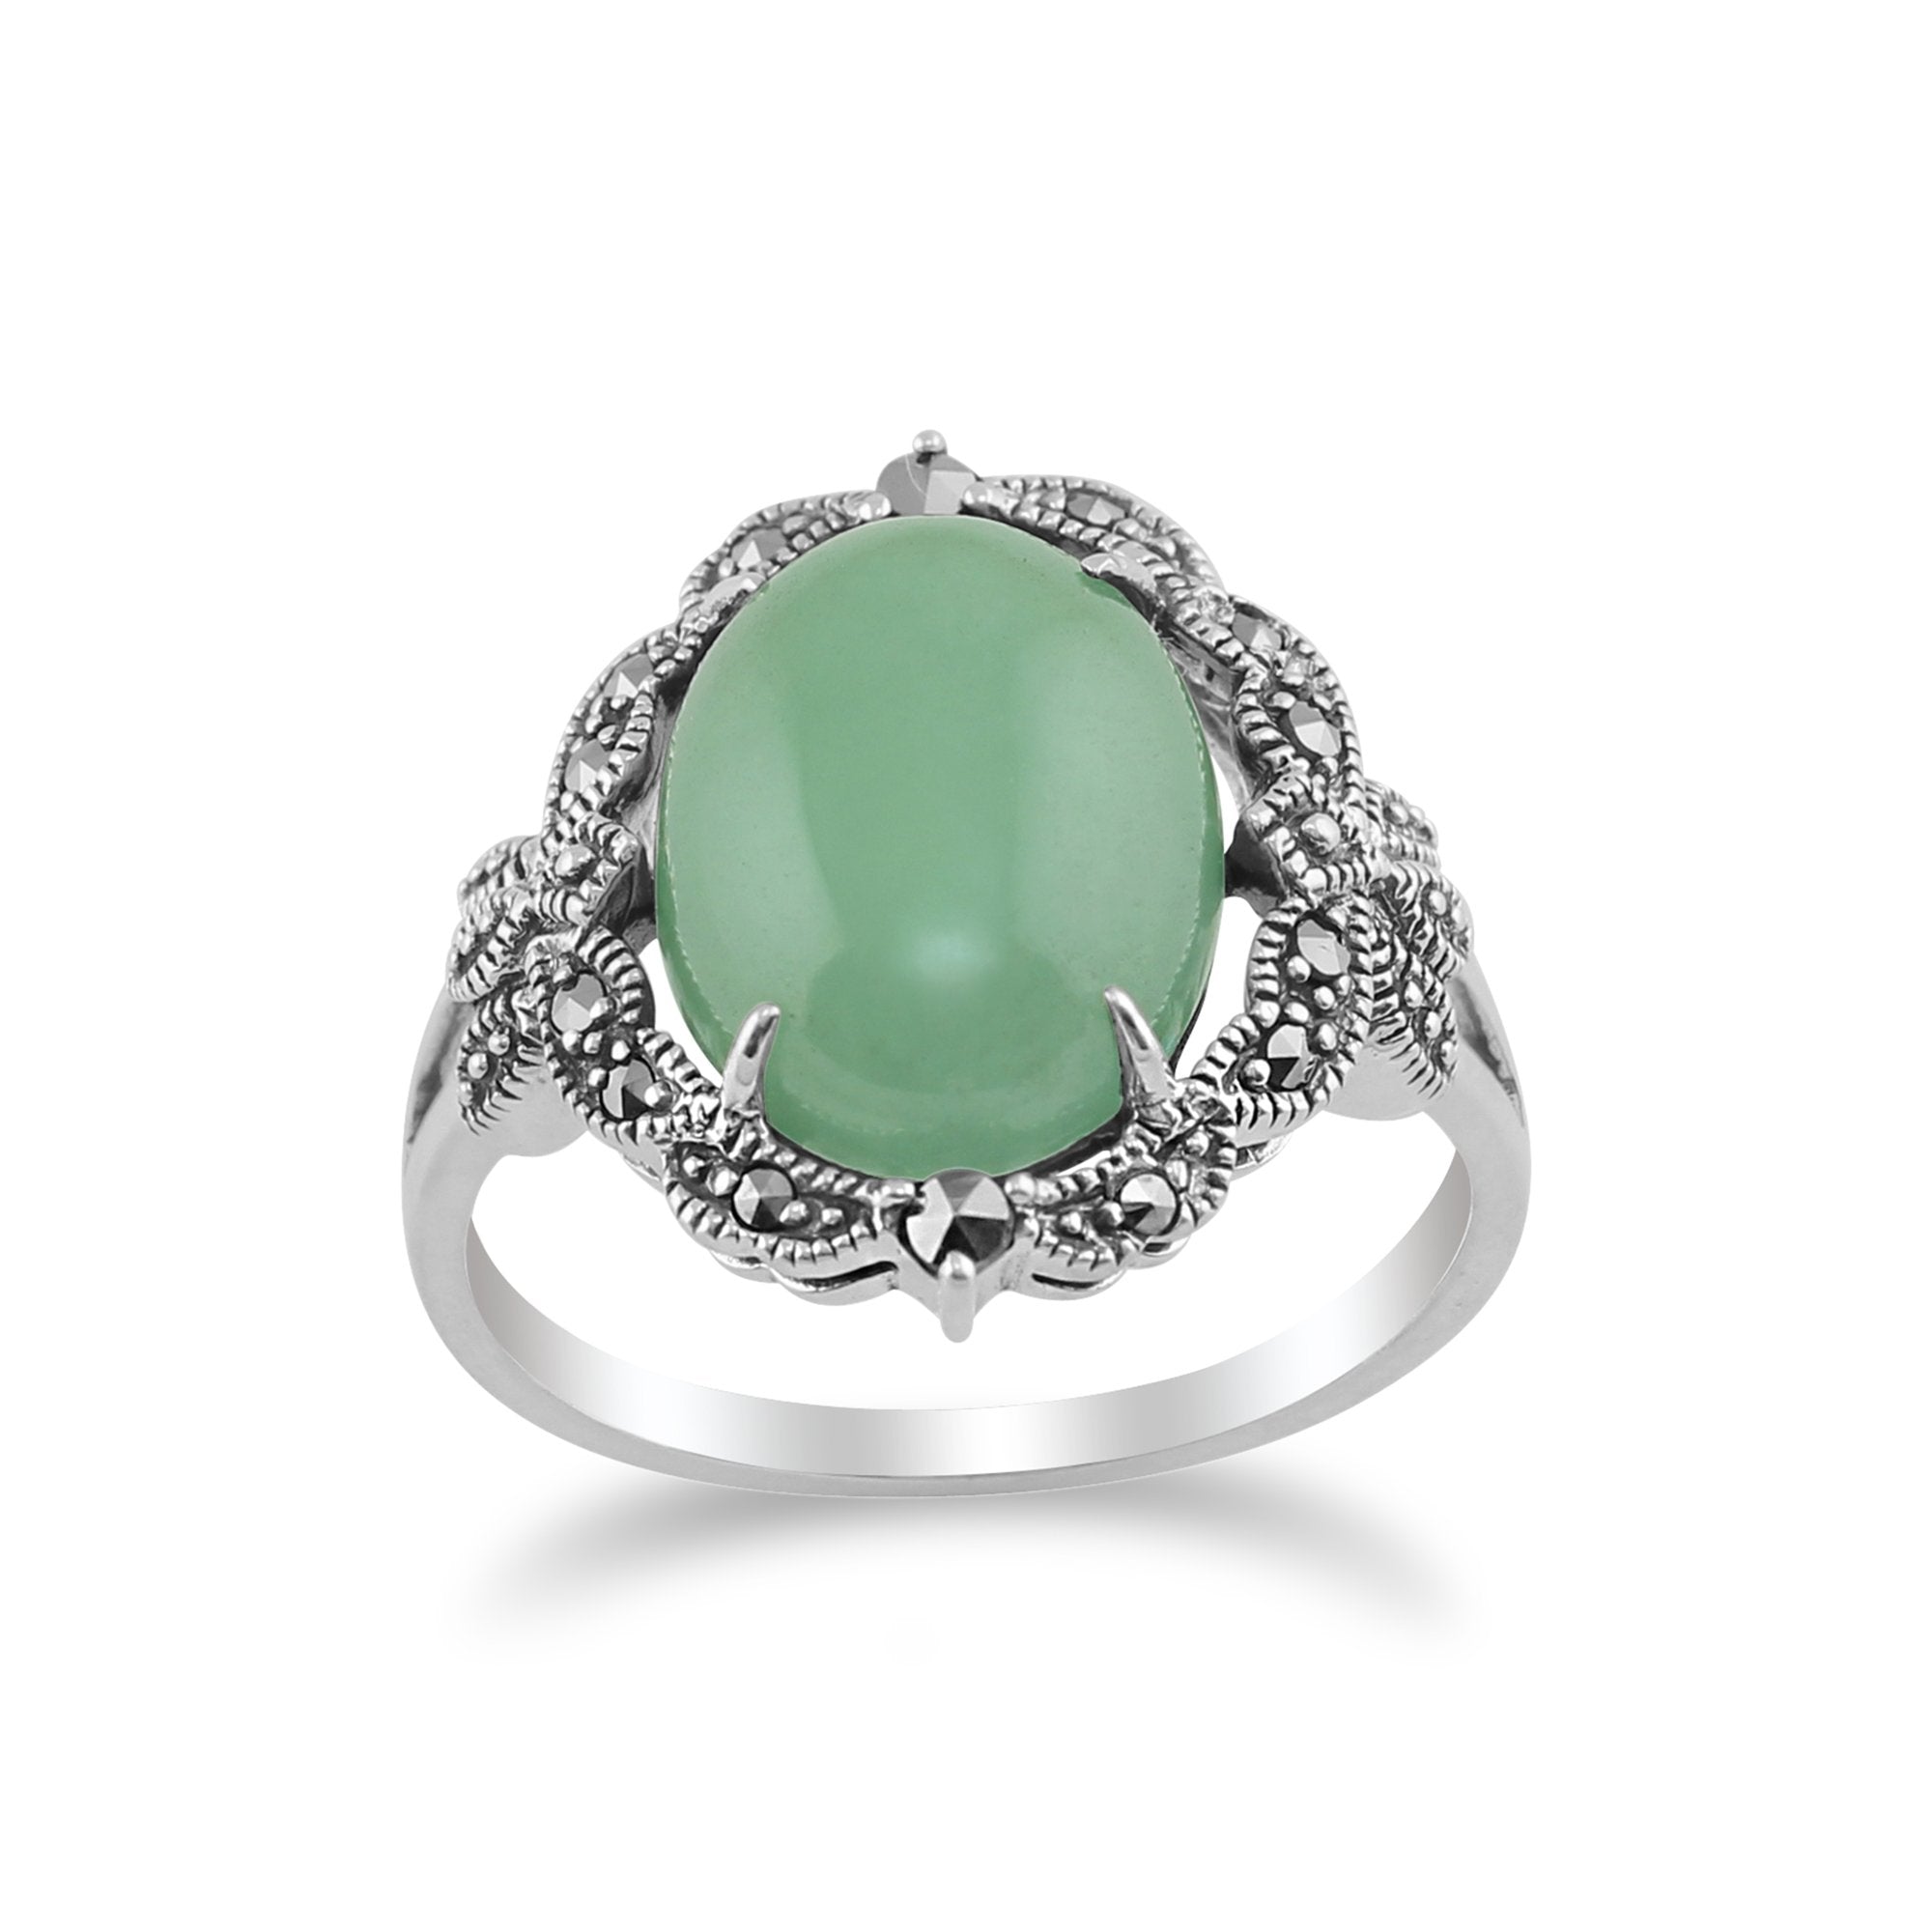 Art Nouveau Style Oval Green Jade Cabochon & Marcasite Statement Ring in 925 Sterling Silver